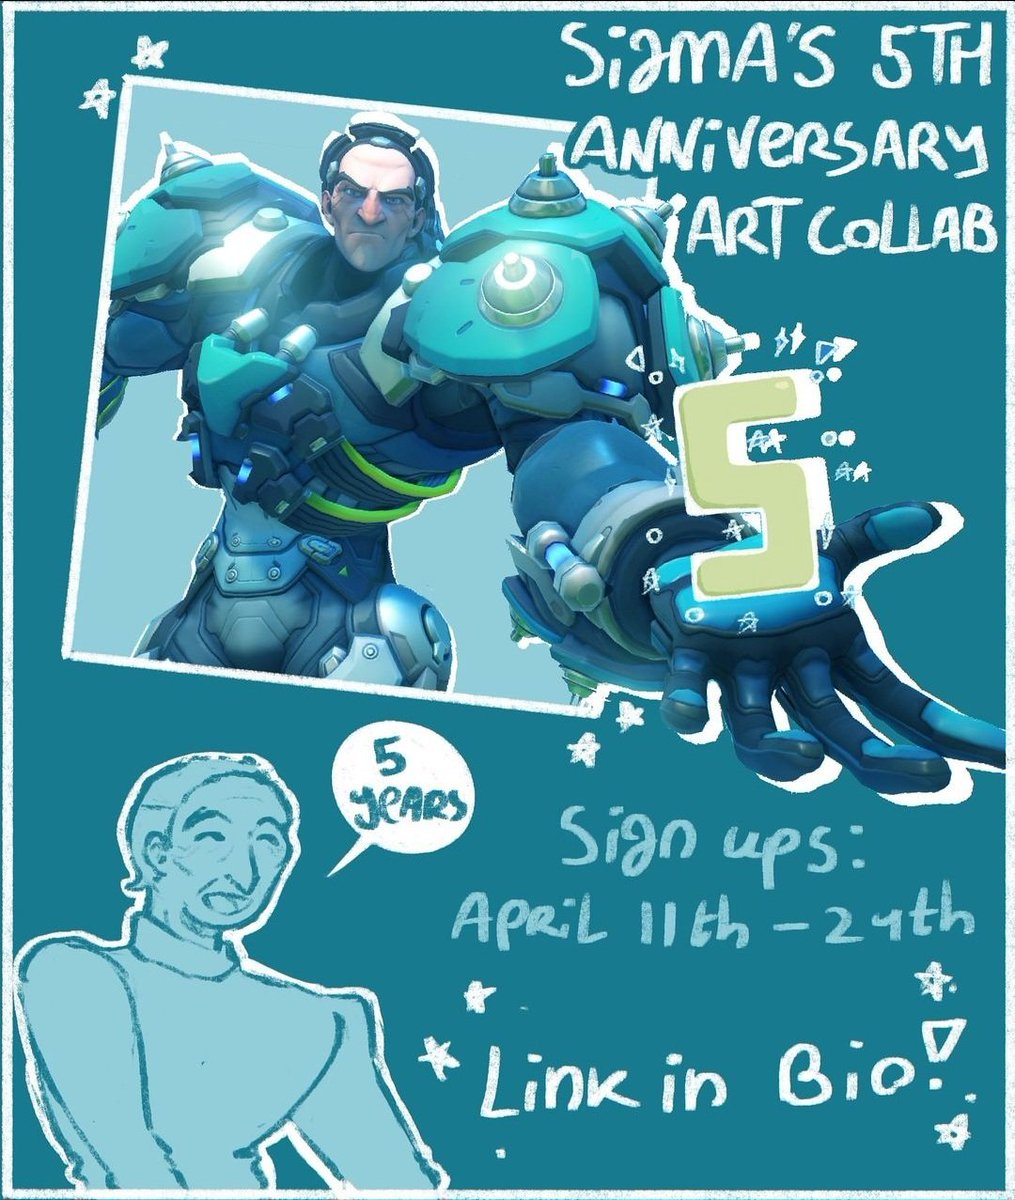 SIGMA ANNIVERSARY COLLAB ⭐️
Afterlematch organised a huge Sigma collab! Check the link if you wanna apply 🩷🩷
You must have Discord! 🫶🏻
docs.google.com/forms/d/e/1FAI…